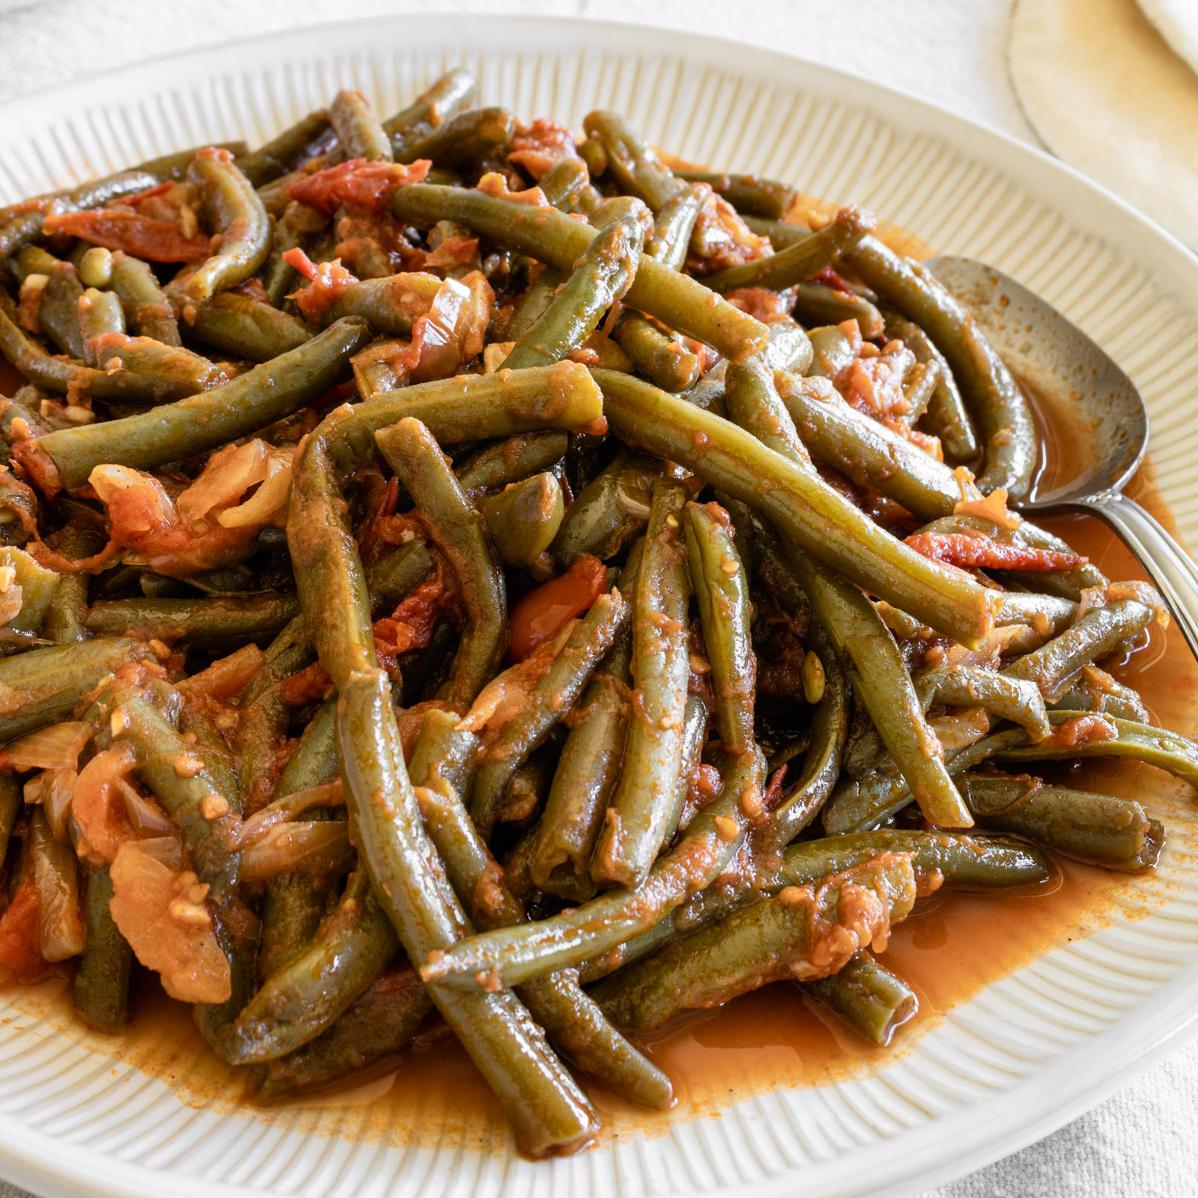  The combination of Lebanese string beans and cilantro will surely excite your taste buds.